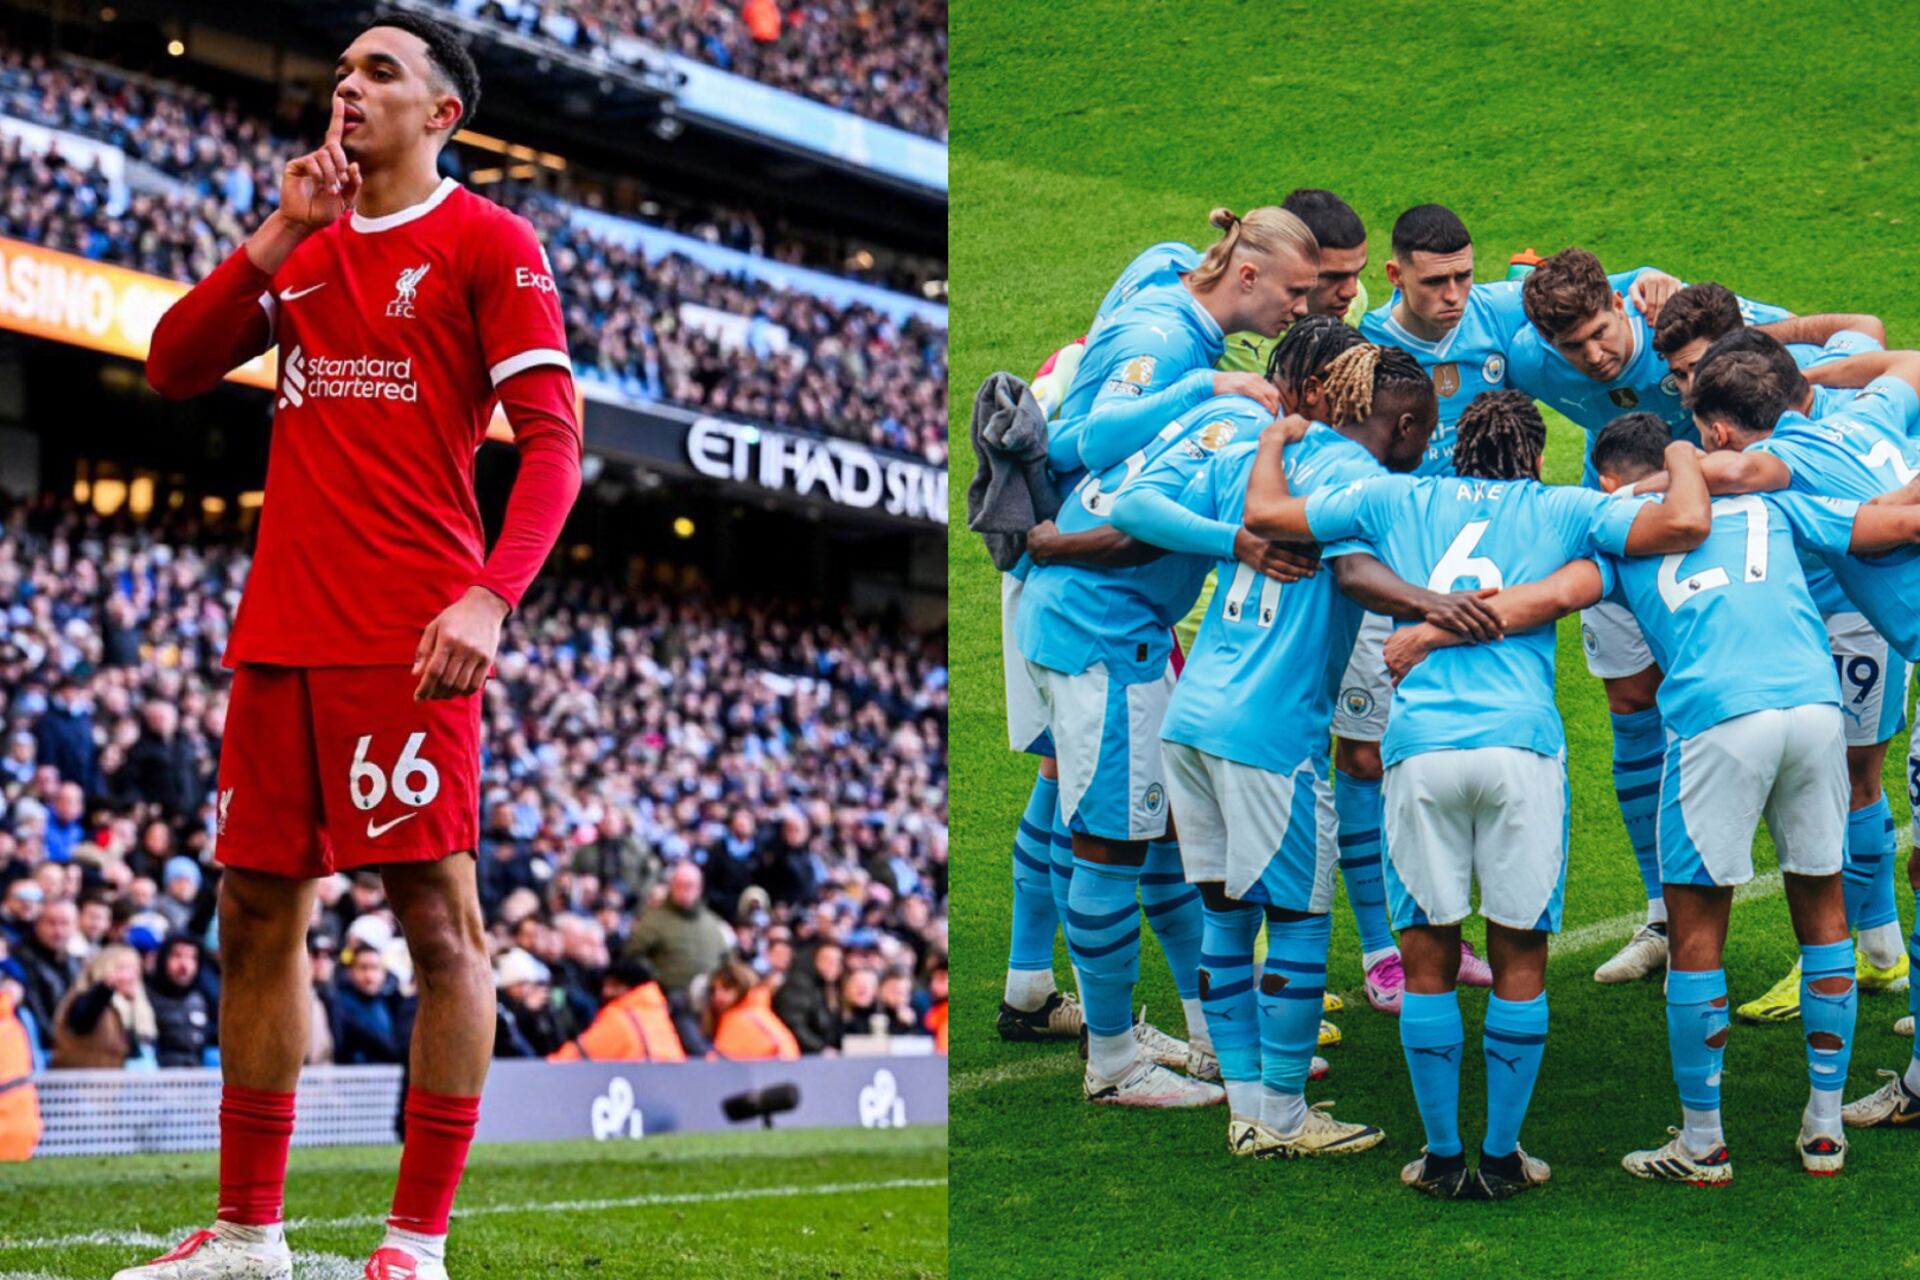 Trent Alexander-Arnold shames Man City ahead of the crucial game on Sunday